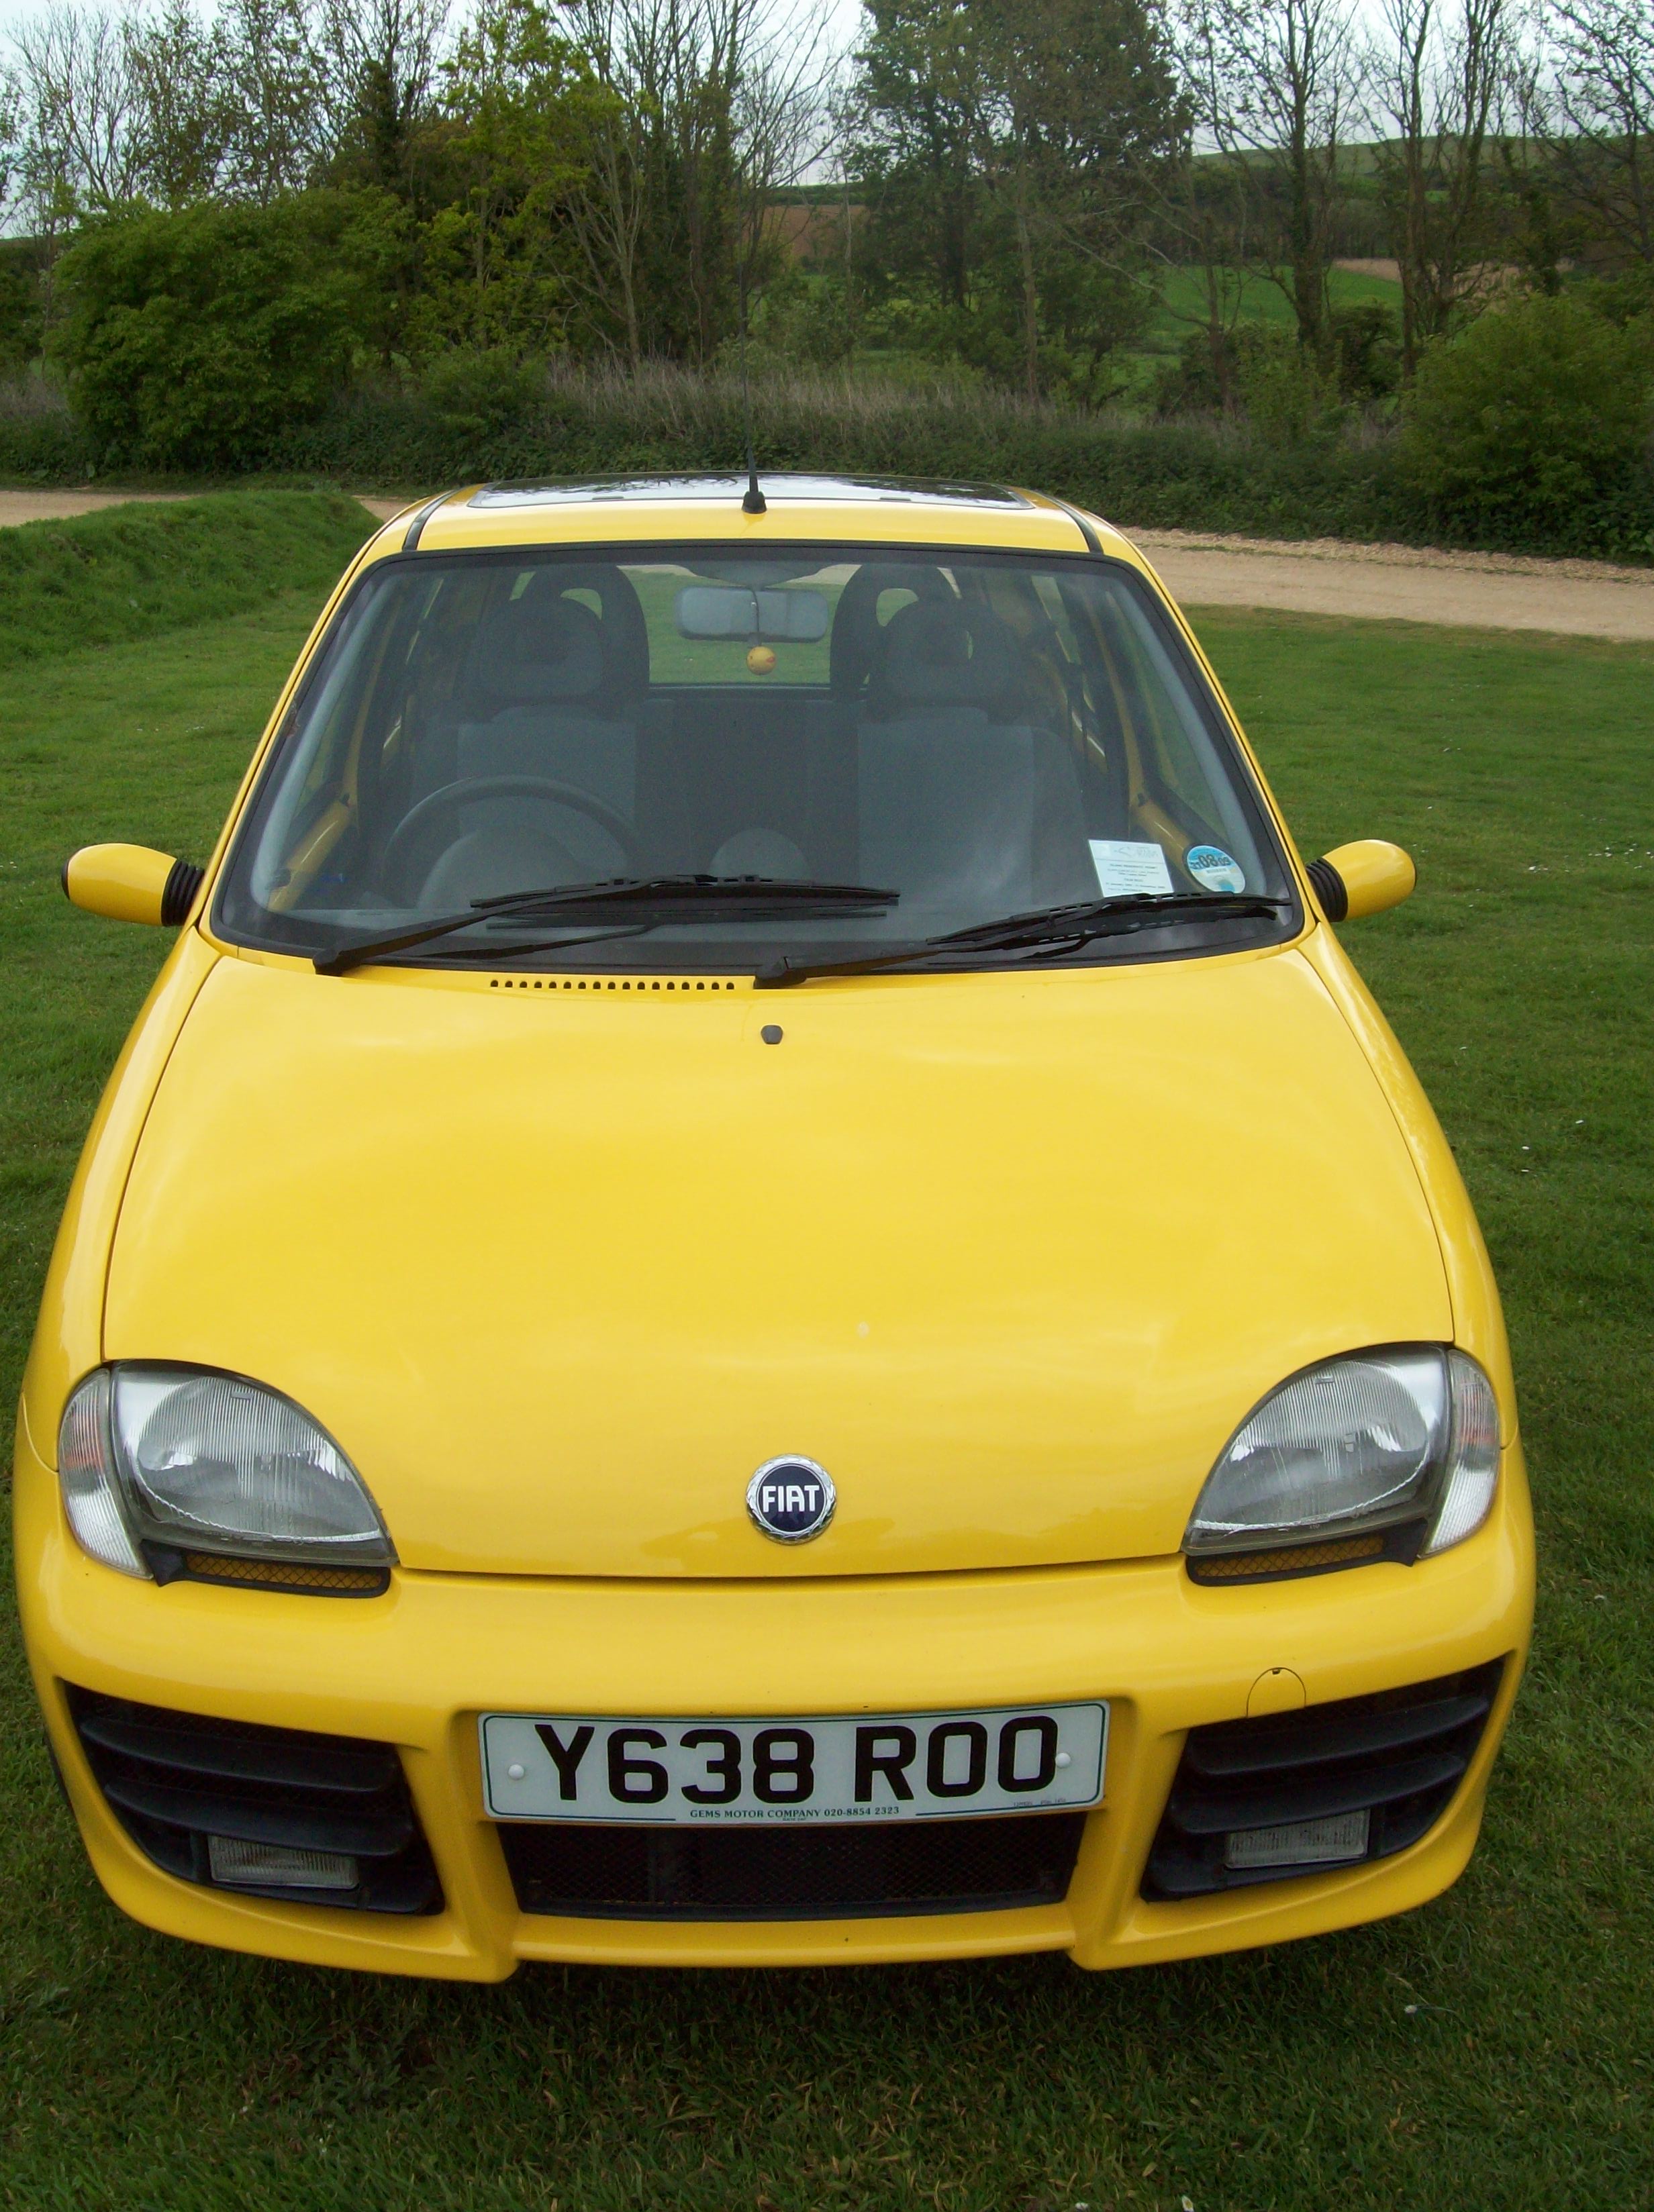 Barry Roo, my Seicento Sporting Schumacher